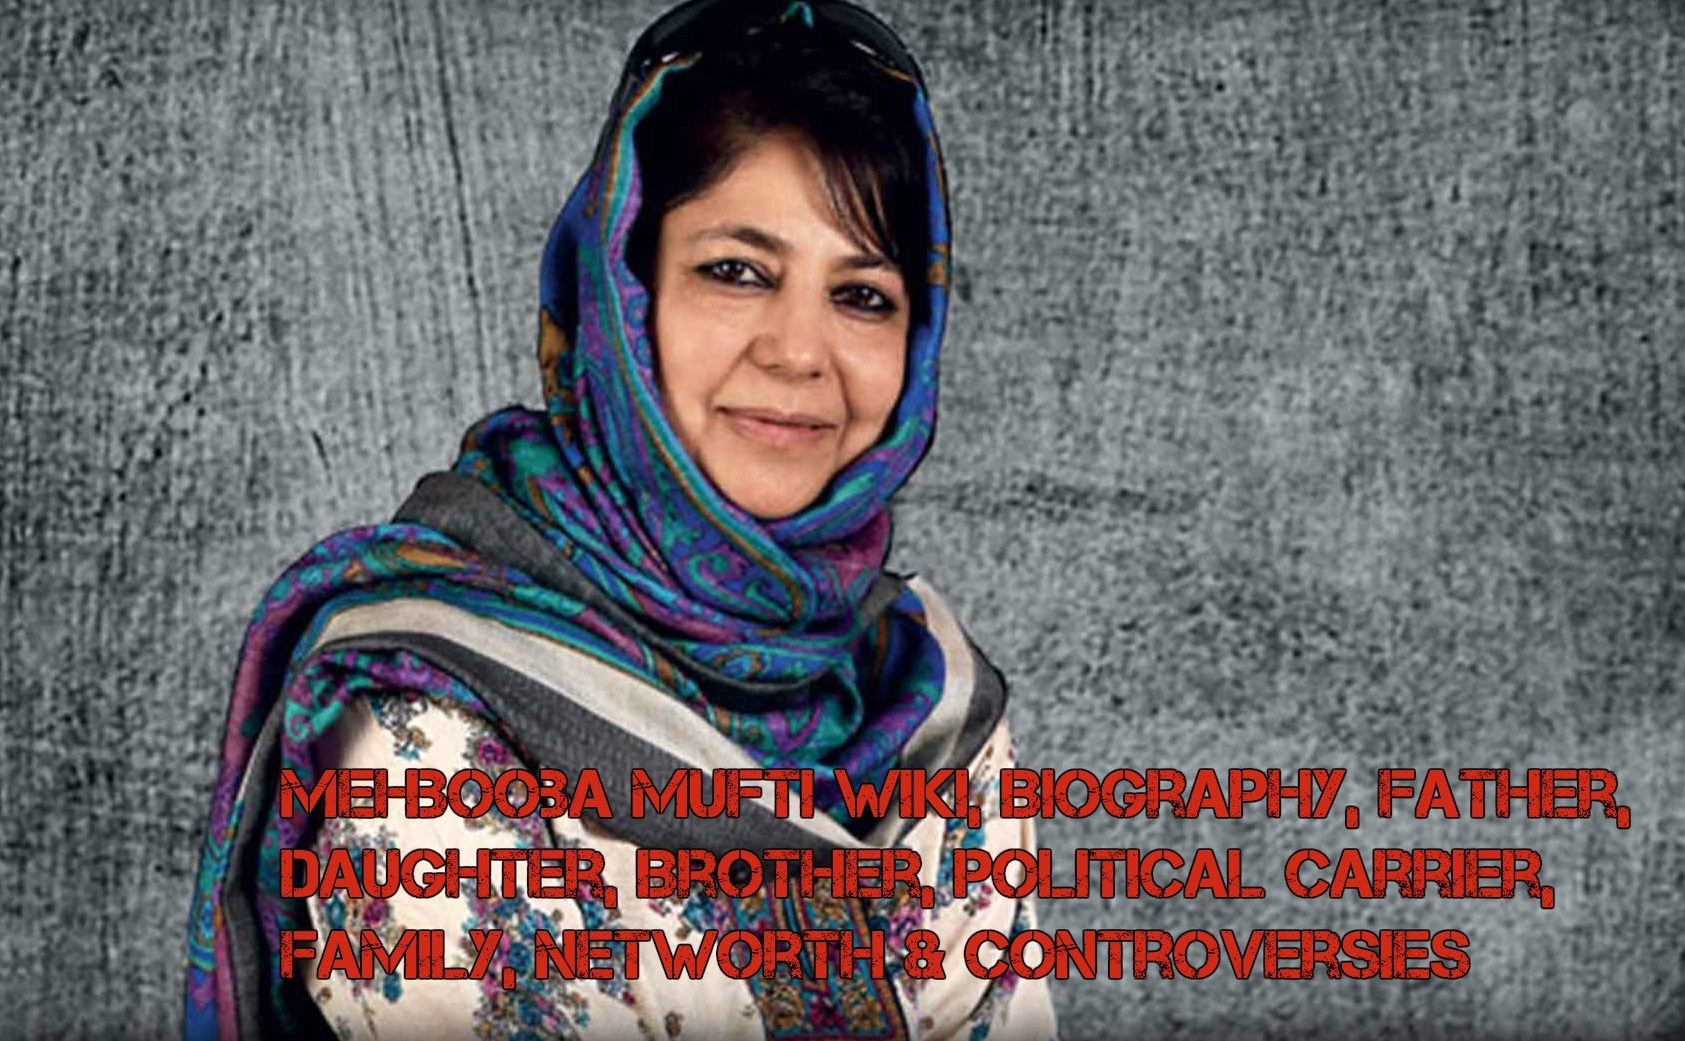 Mehbooba Mufti wiki, Biography, Father, Daughter, Brother, Political Carrier, Family, Networth & Controversies